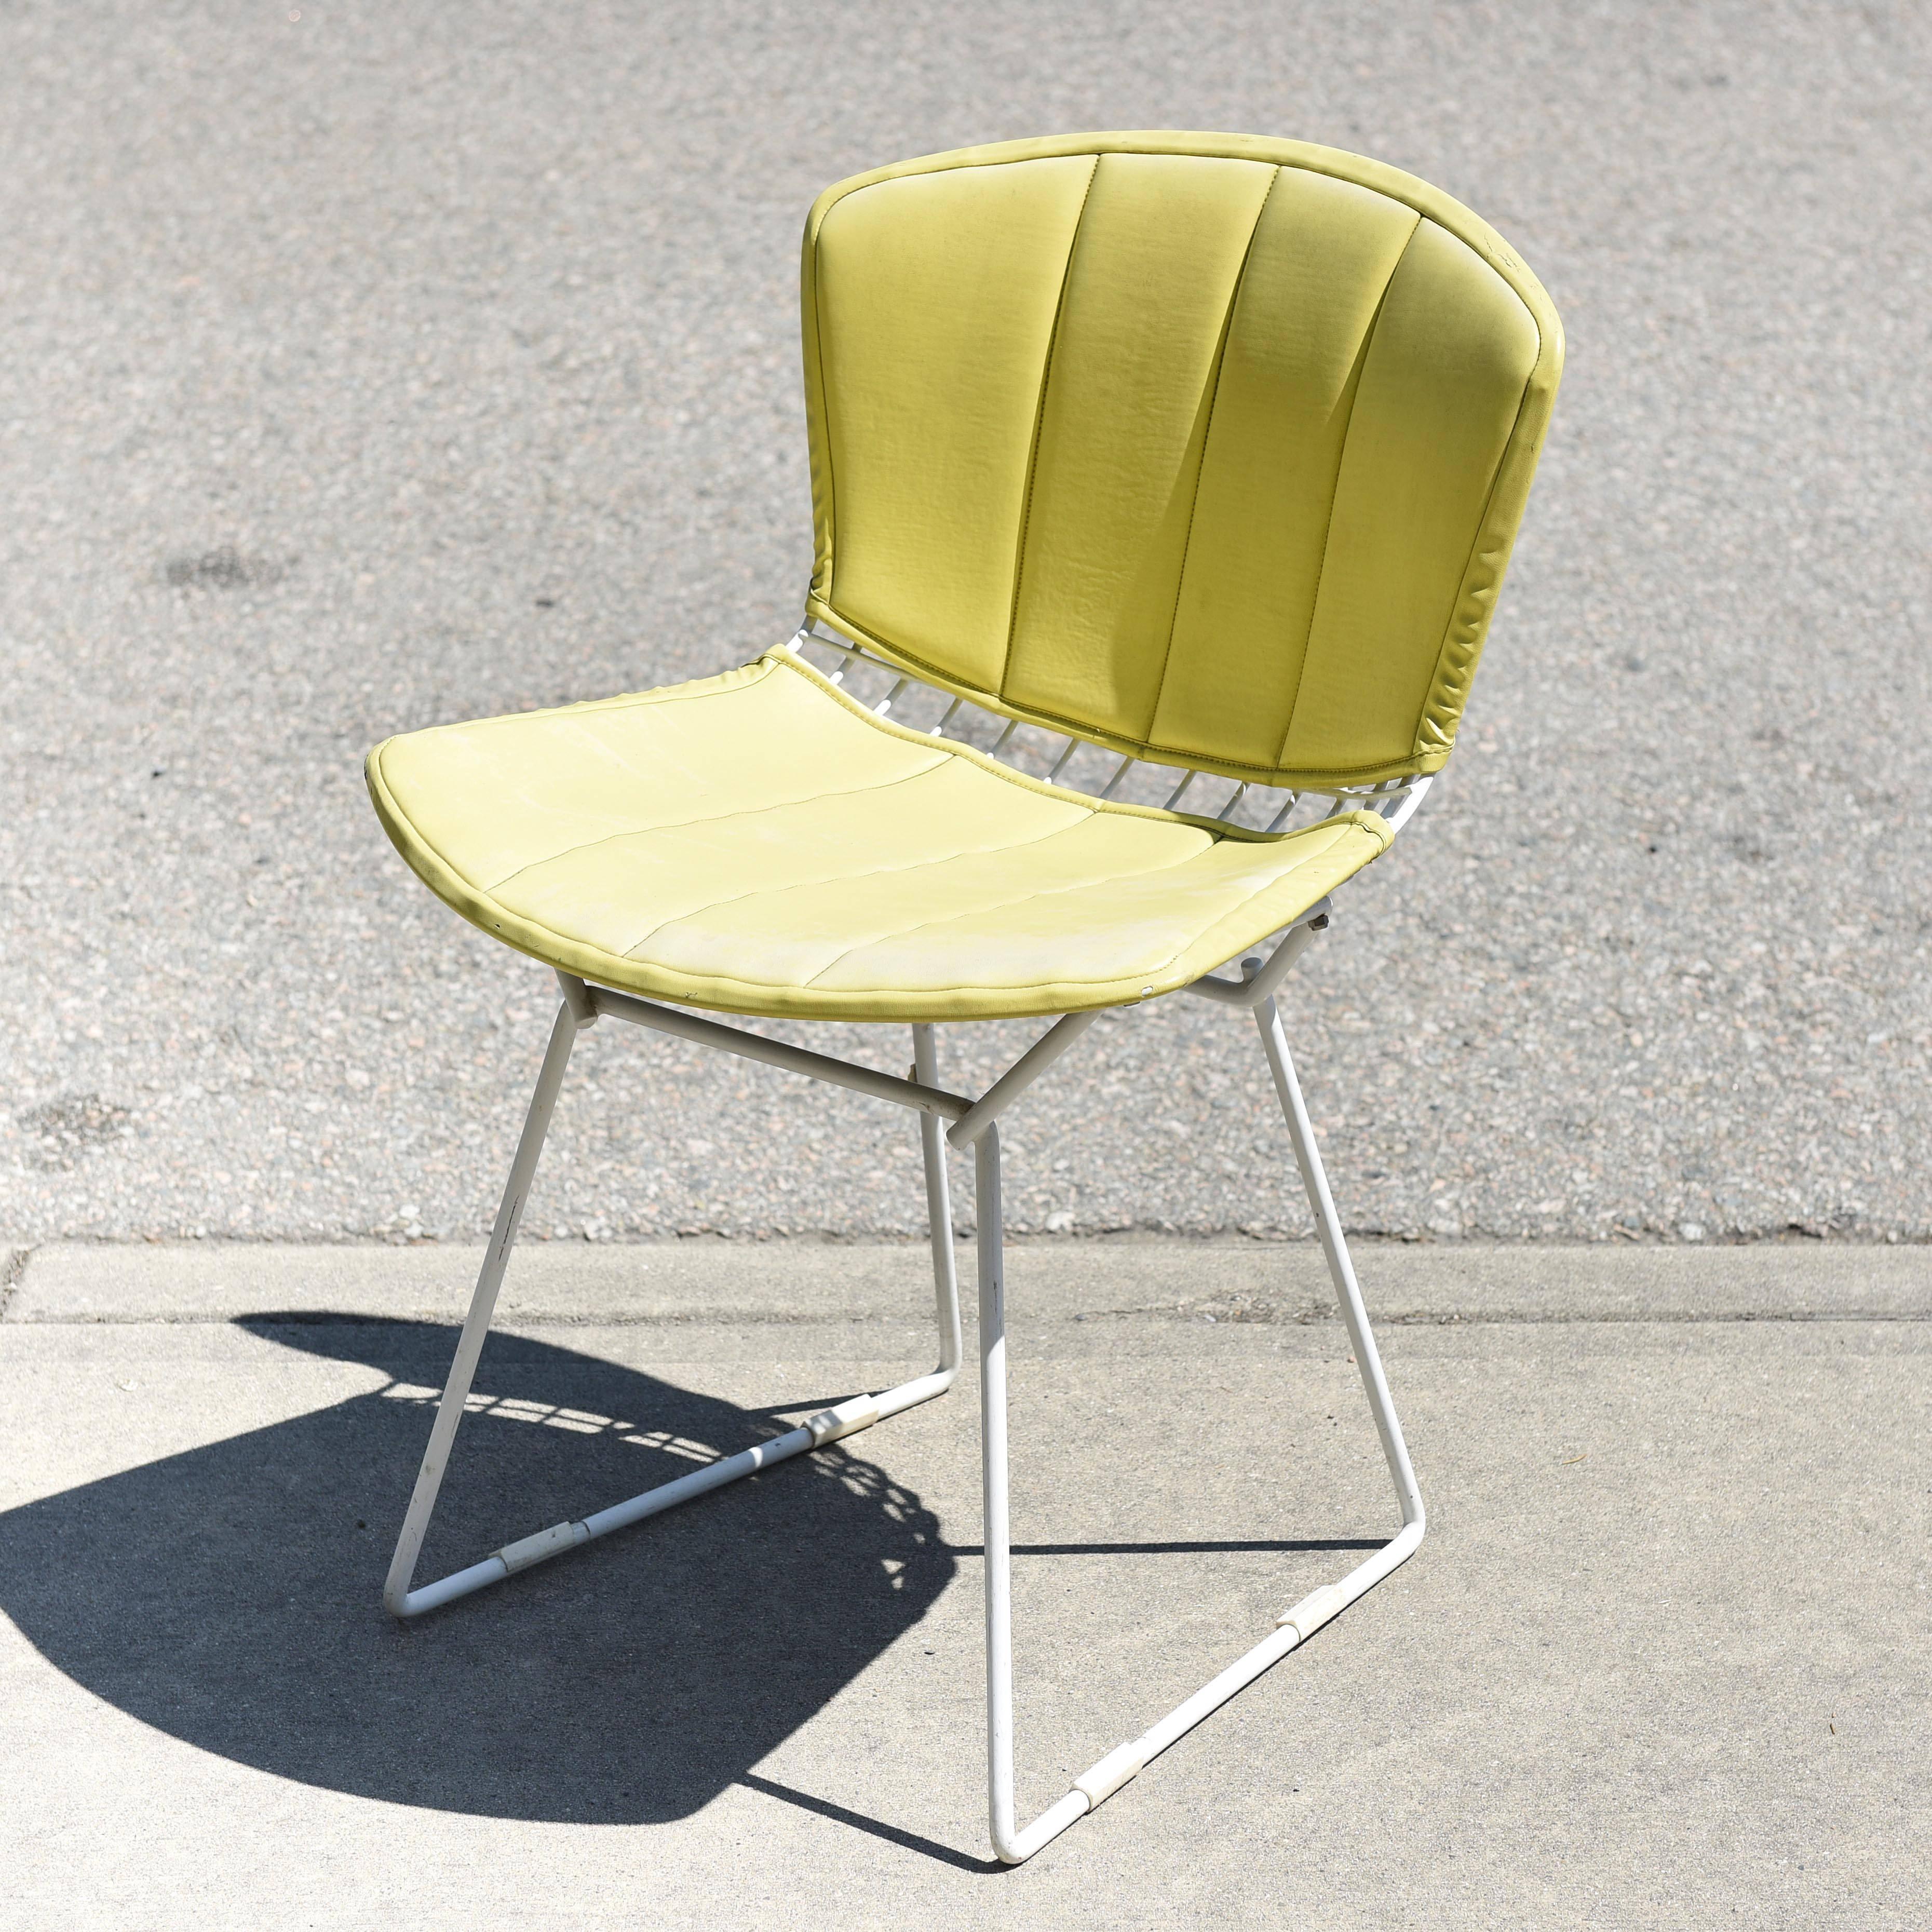 Bertoia wire chair in original condition. Vintage yellow vinyl upholstery has minor tear. Original tag on bottom.